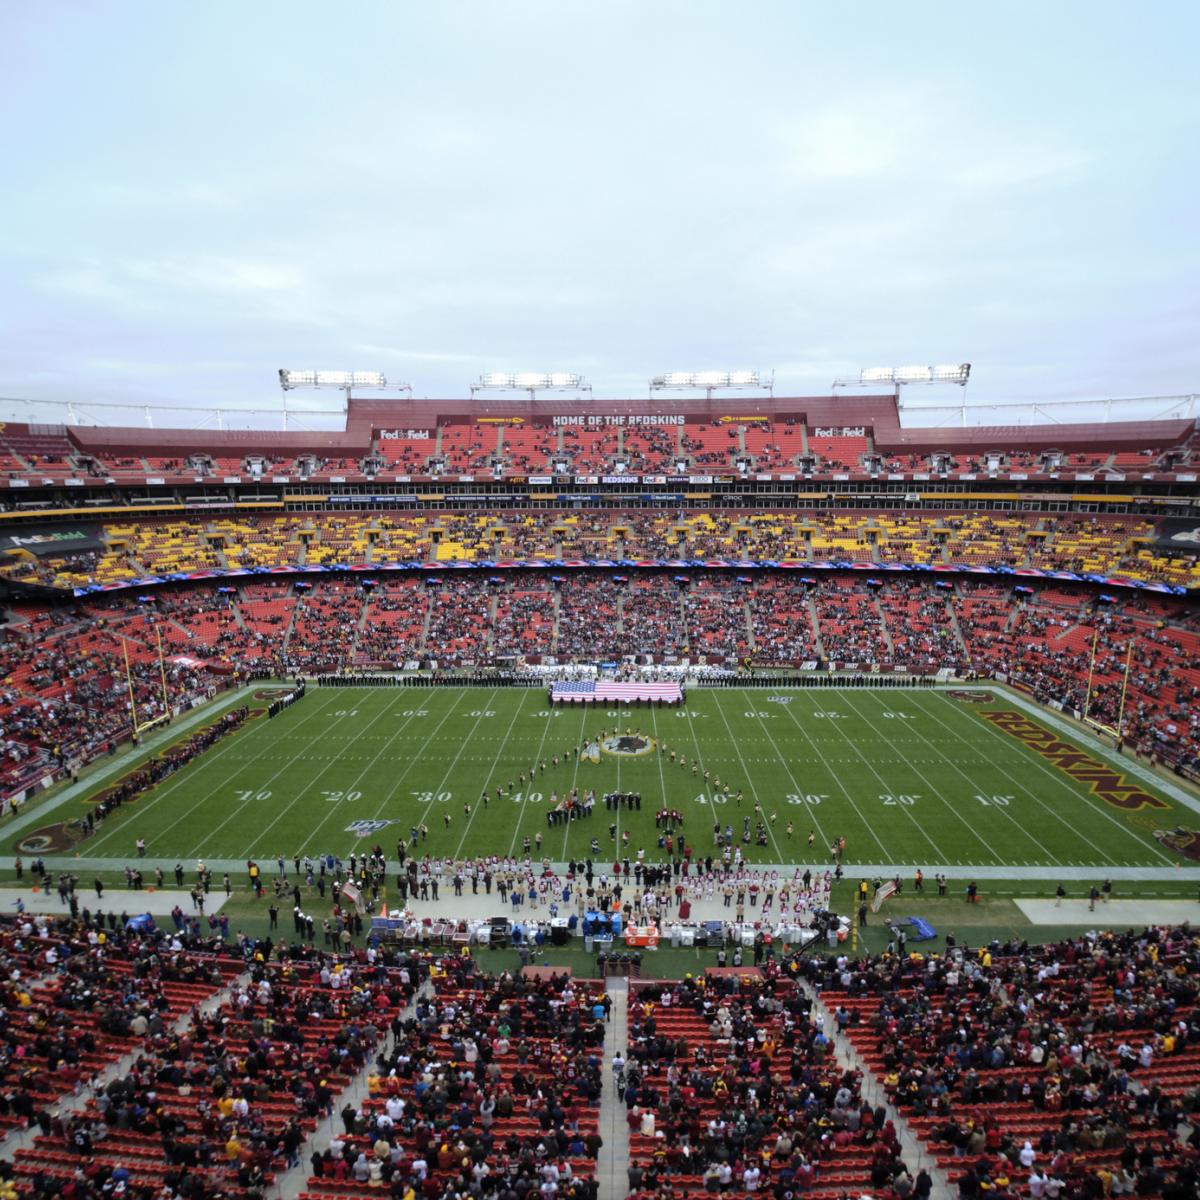 Schefter: Washington NFL Team Source 'Strongly' Denies Rumor of Paying ...